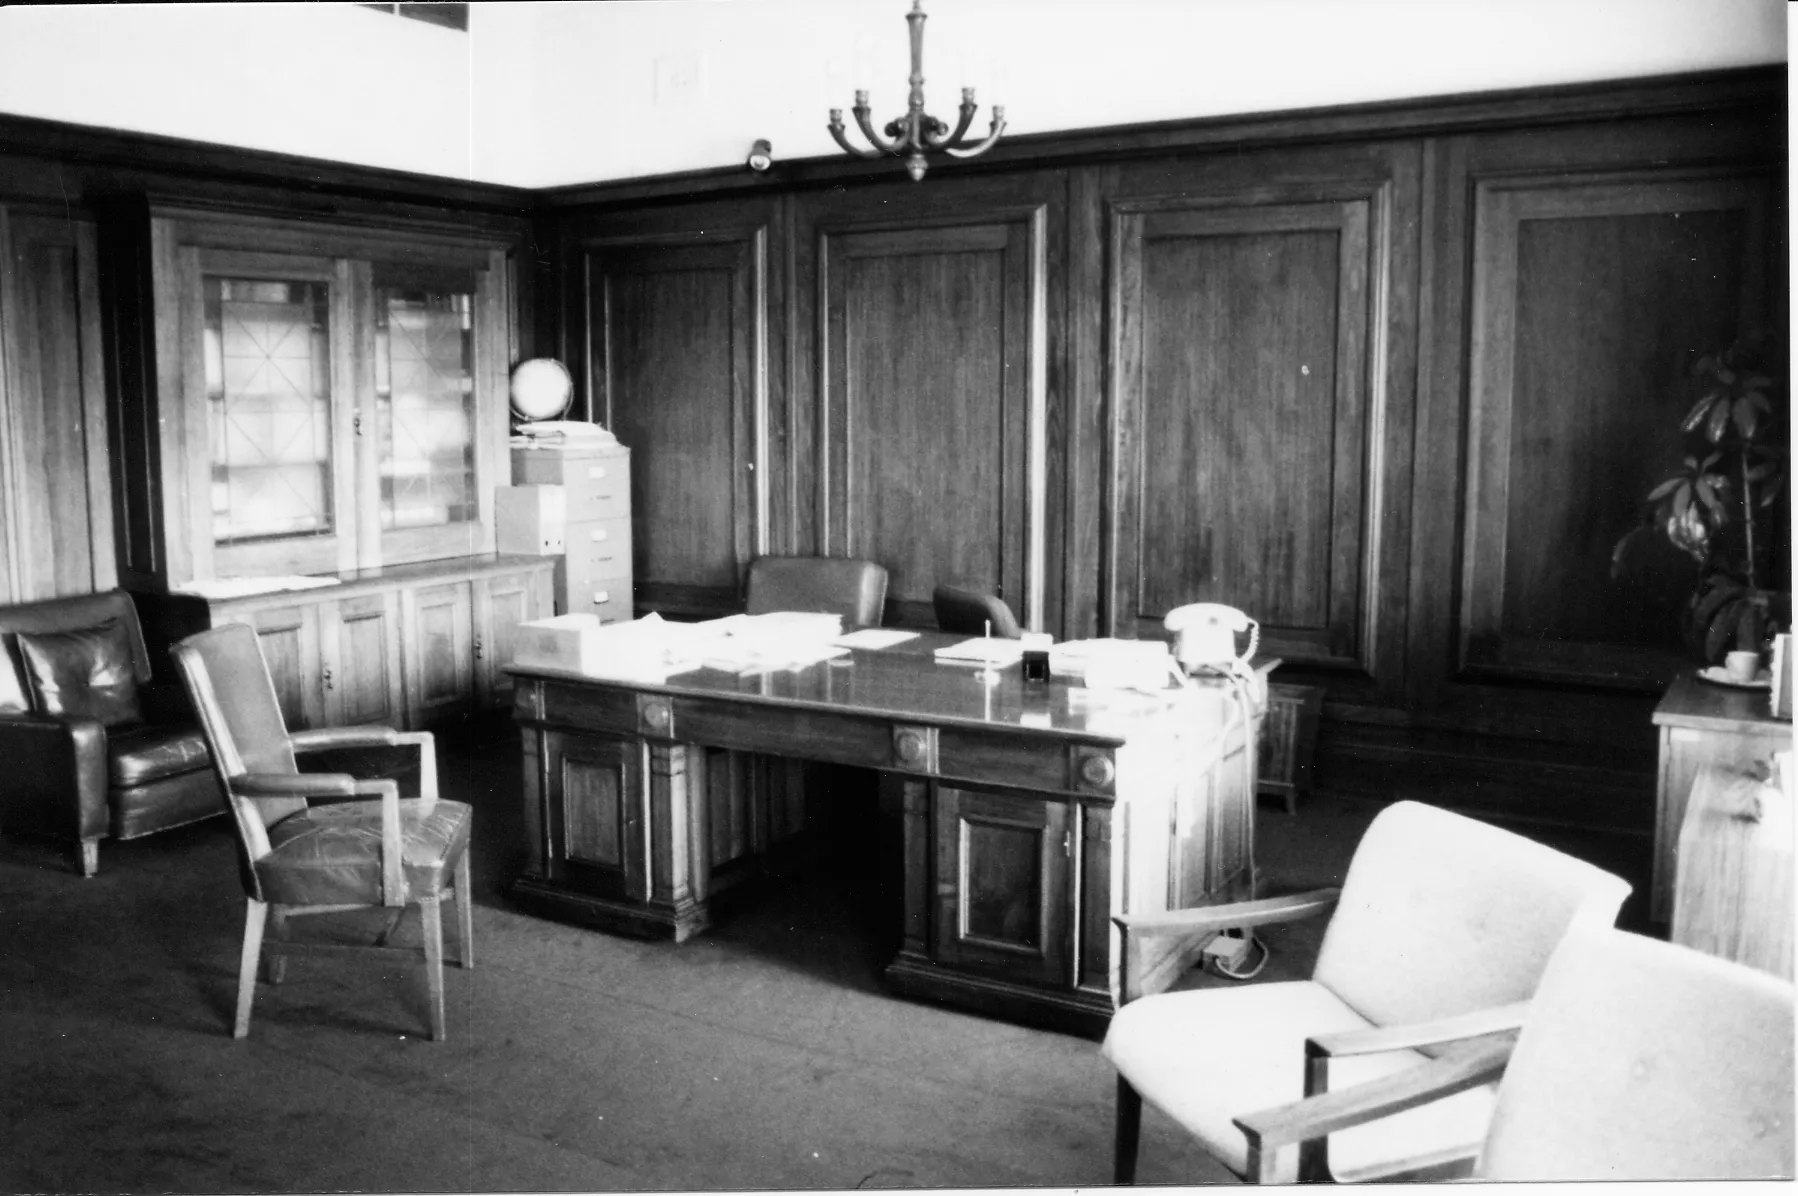 This black and white photograph shows the layout of the Clerk of the Senate’s office in 1985 when it was occupied by Alan Cumming Thom. The timber-panelled room contains a large desk (originally designed by the building’s architect, John Smith Murdoch), glass-fronted built-in bookshelves and a sideboard with an indoor plant. There are a range of visitor chairs and an easy chair in the foreground.